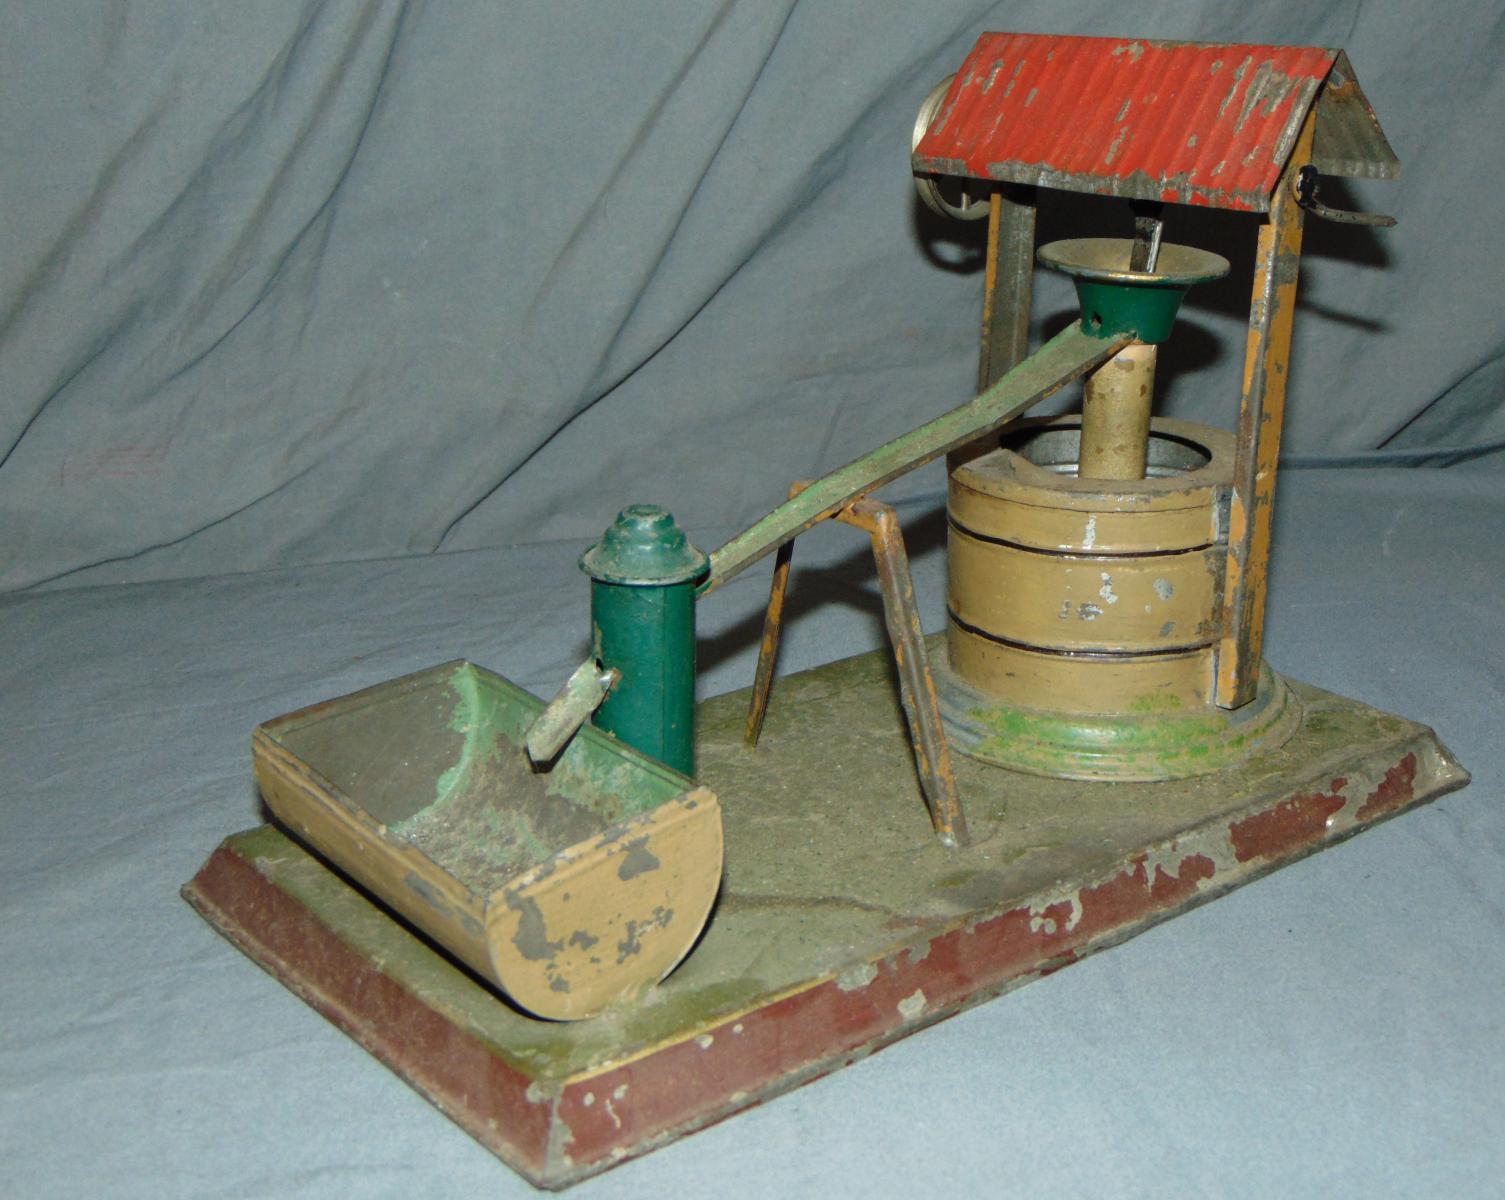 4 Early German Toys